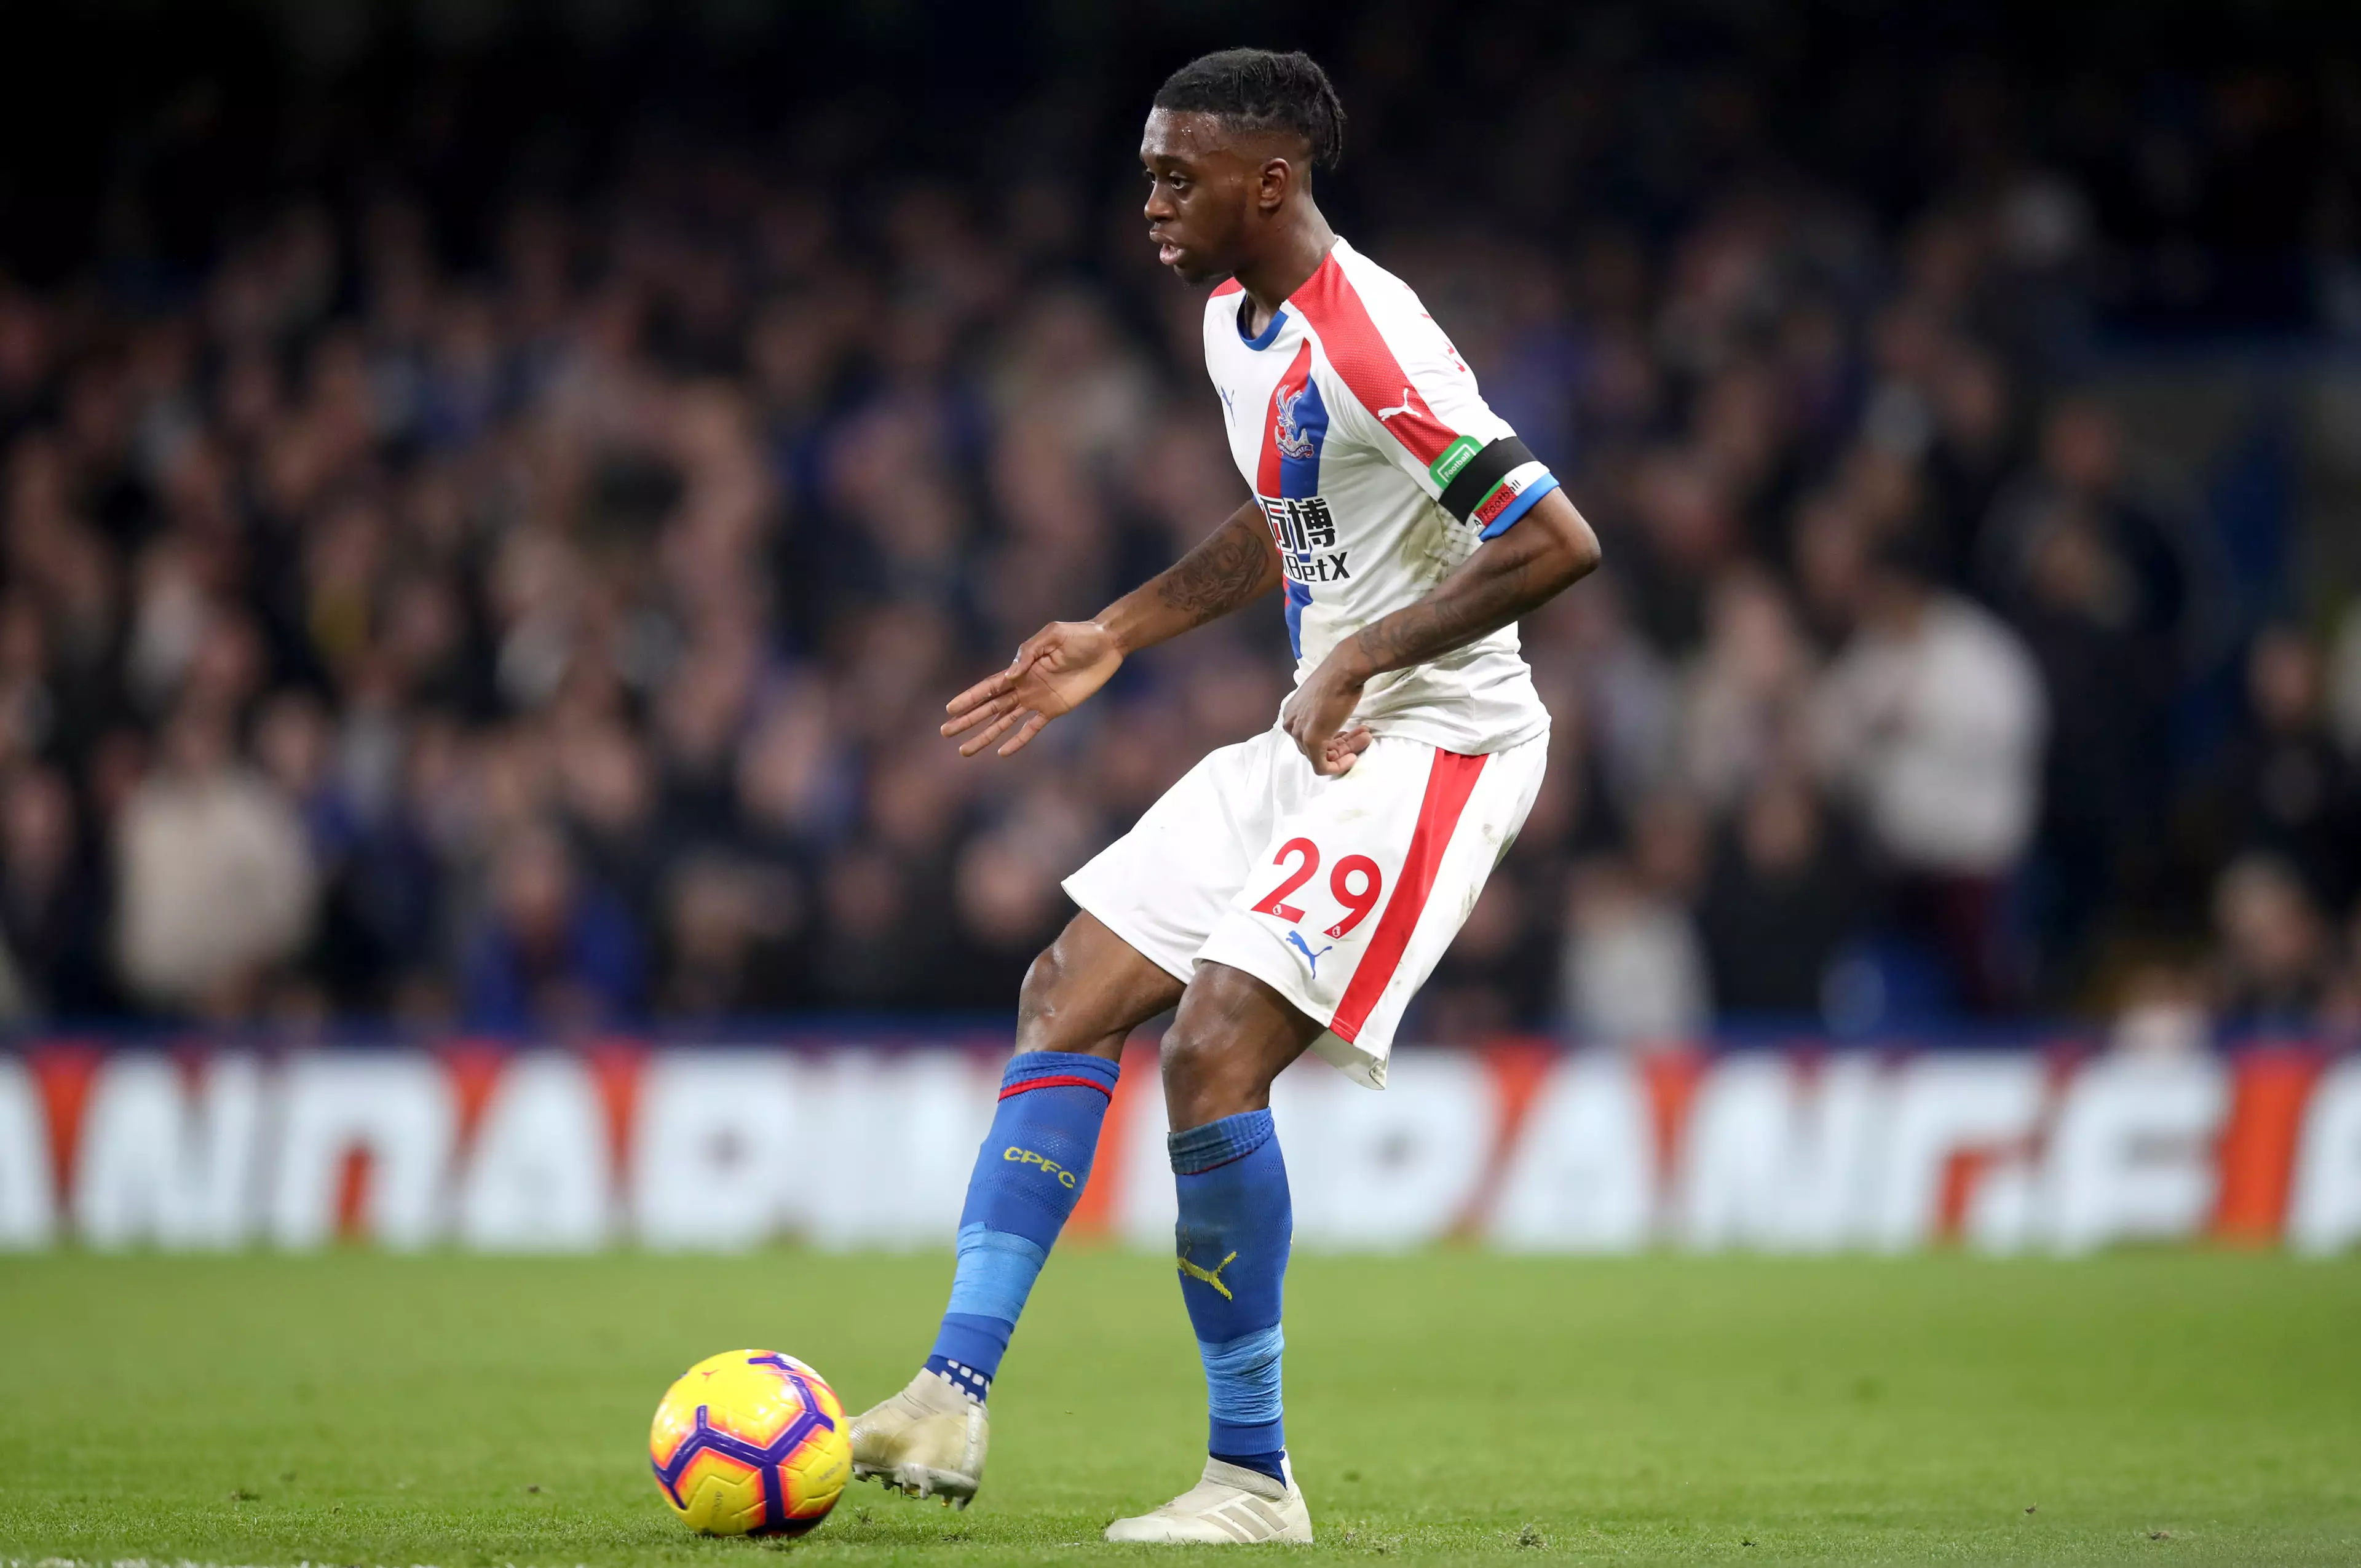 Wan-Bissaka was playing in just his second season. Image: PA Images